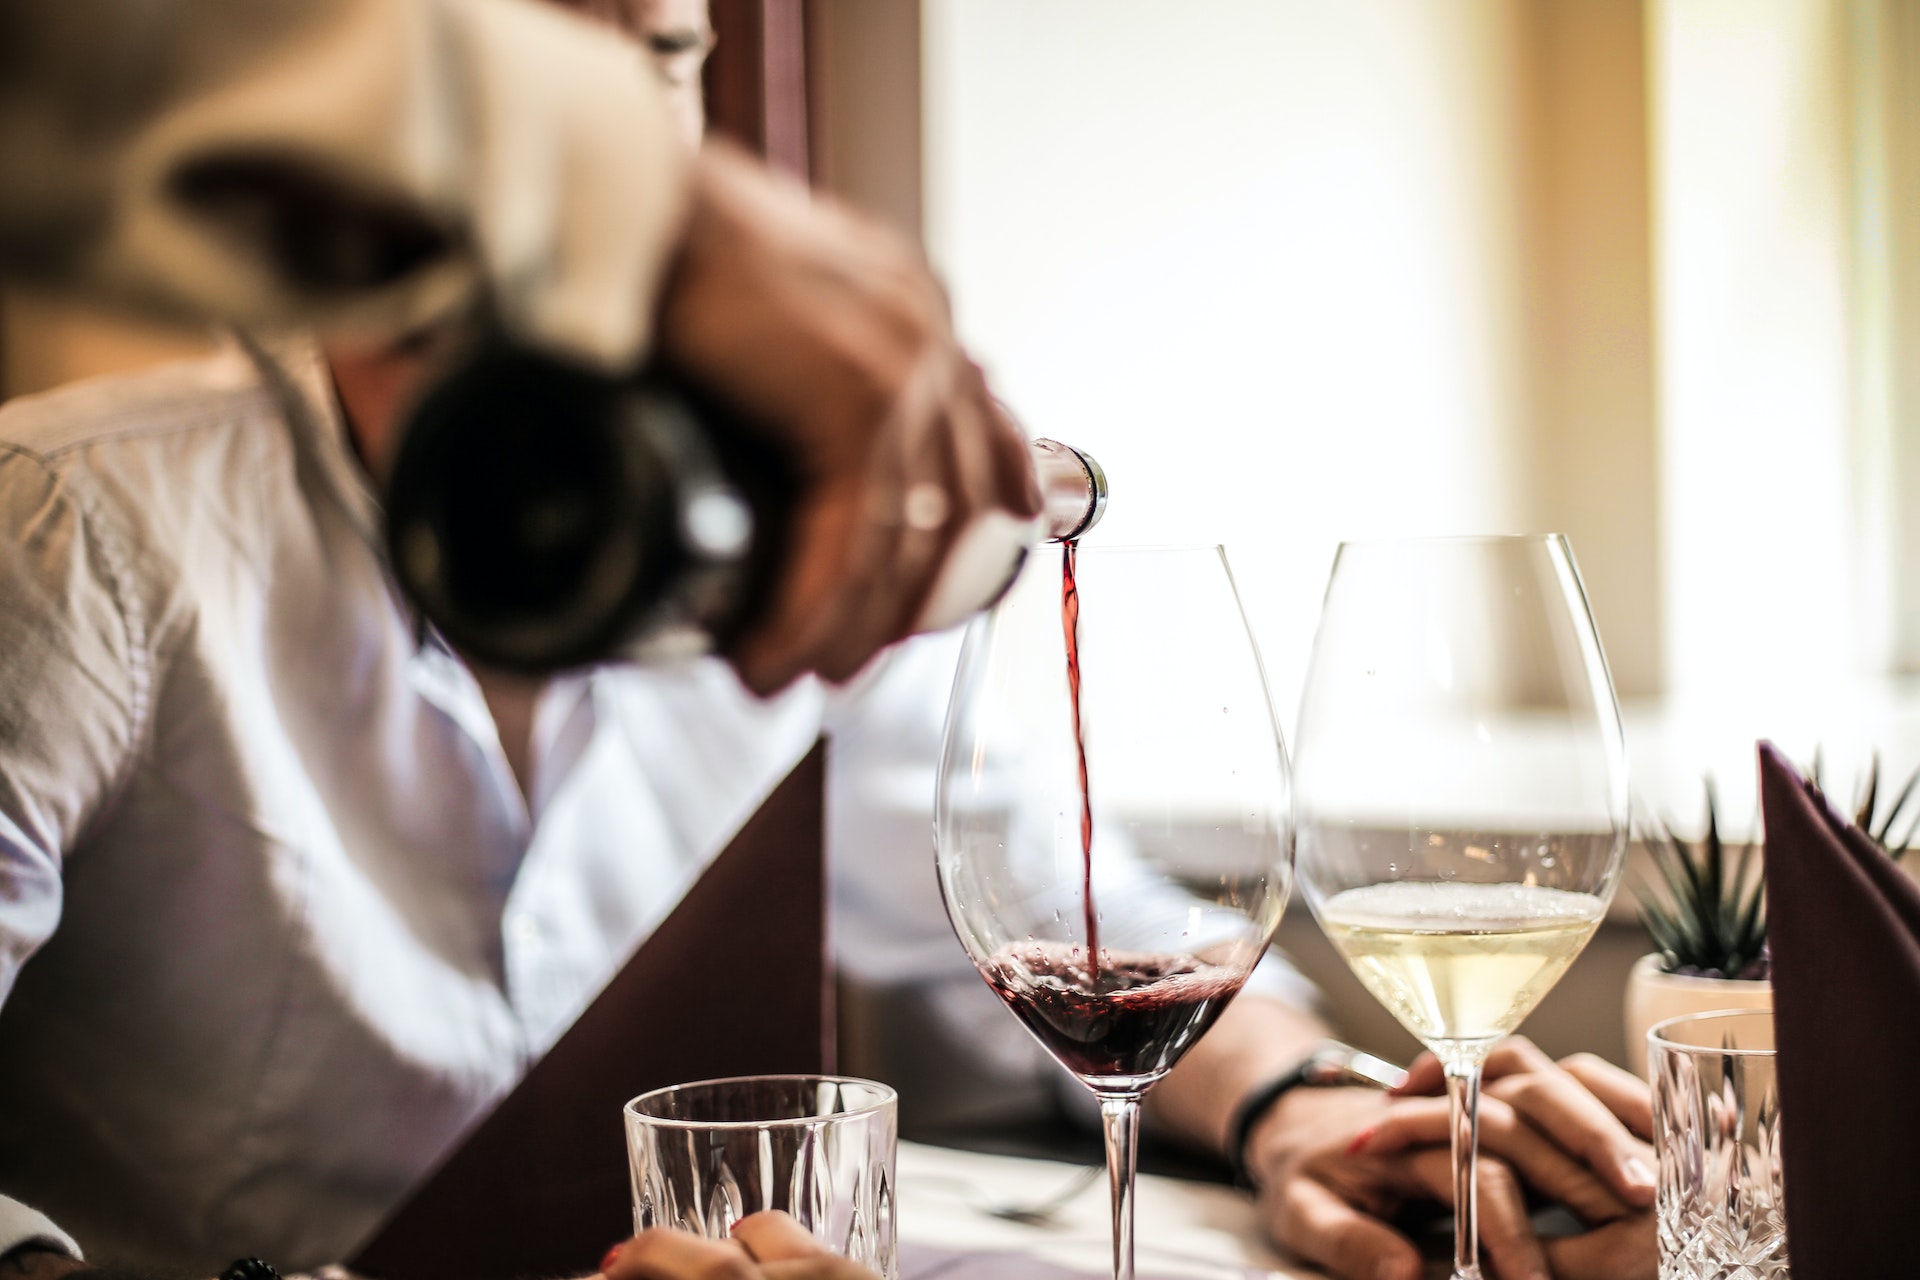 How to Select the Best Type of Wine to Bring to a Dinner Party